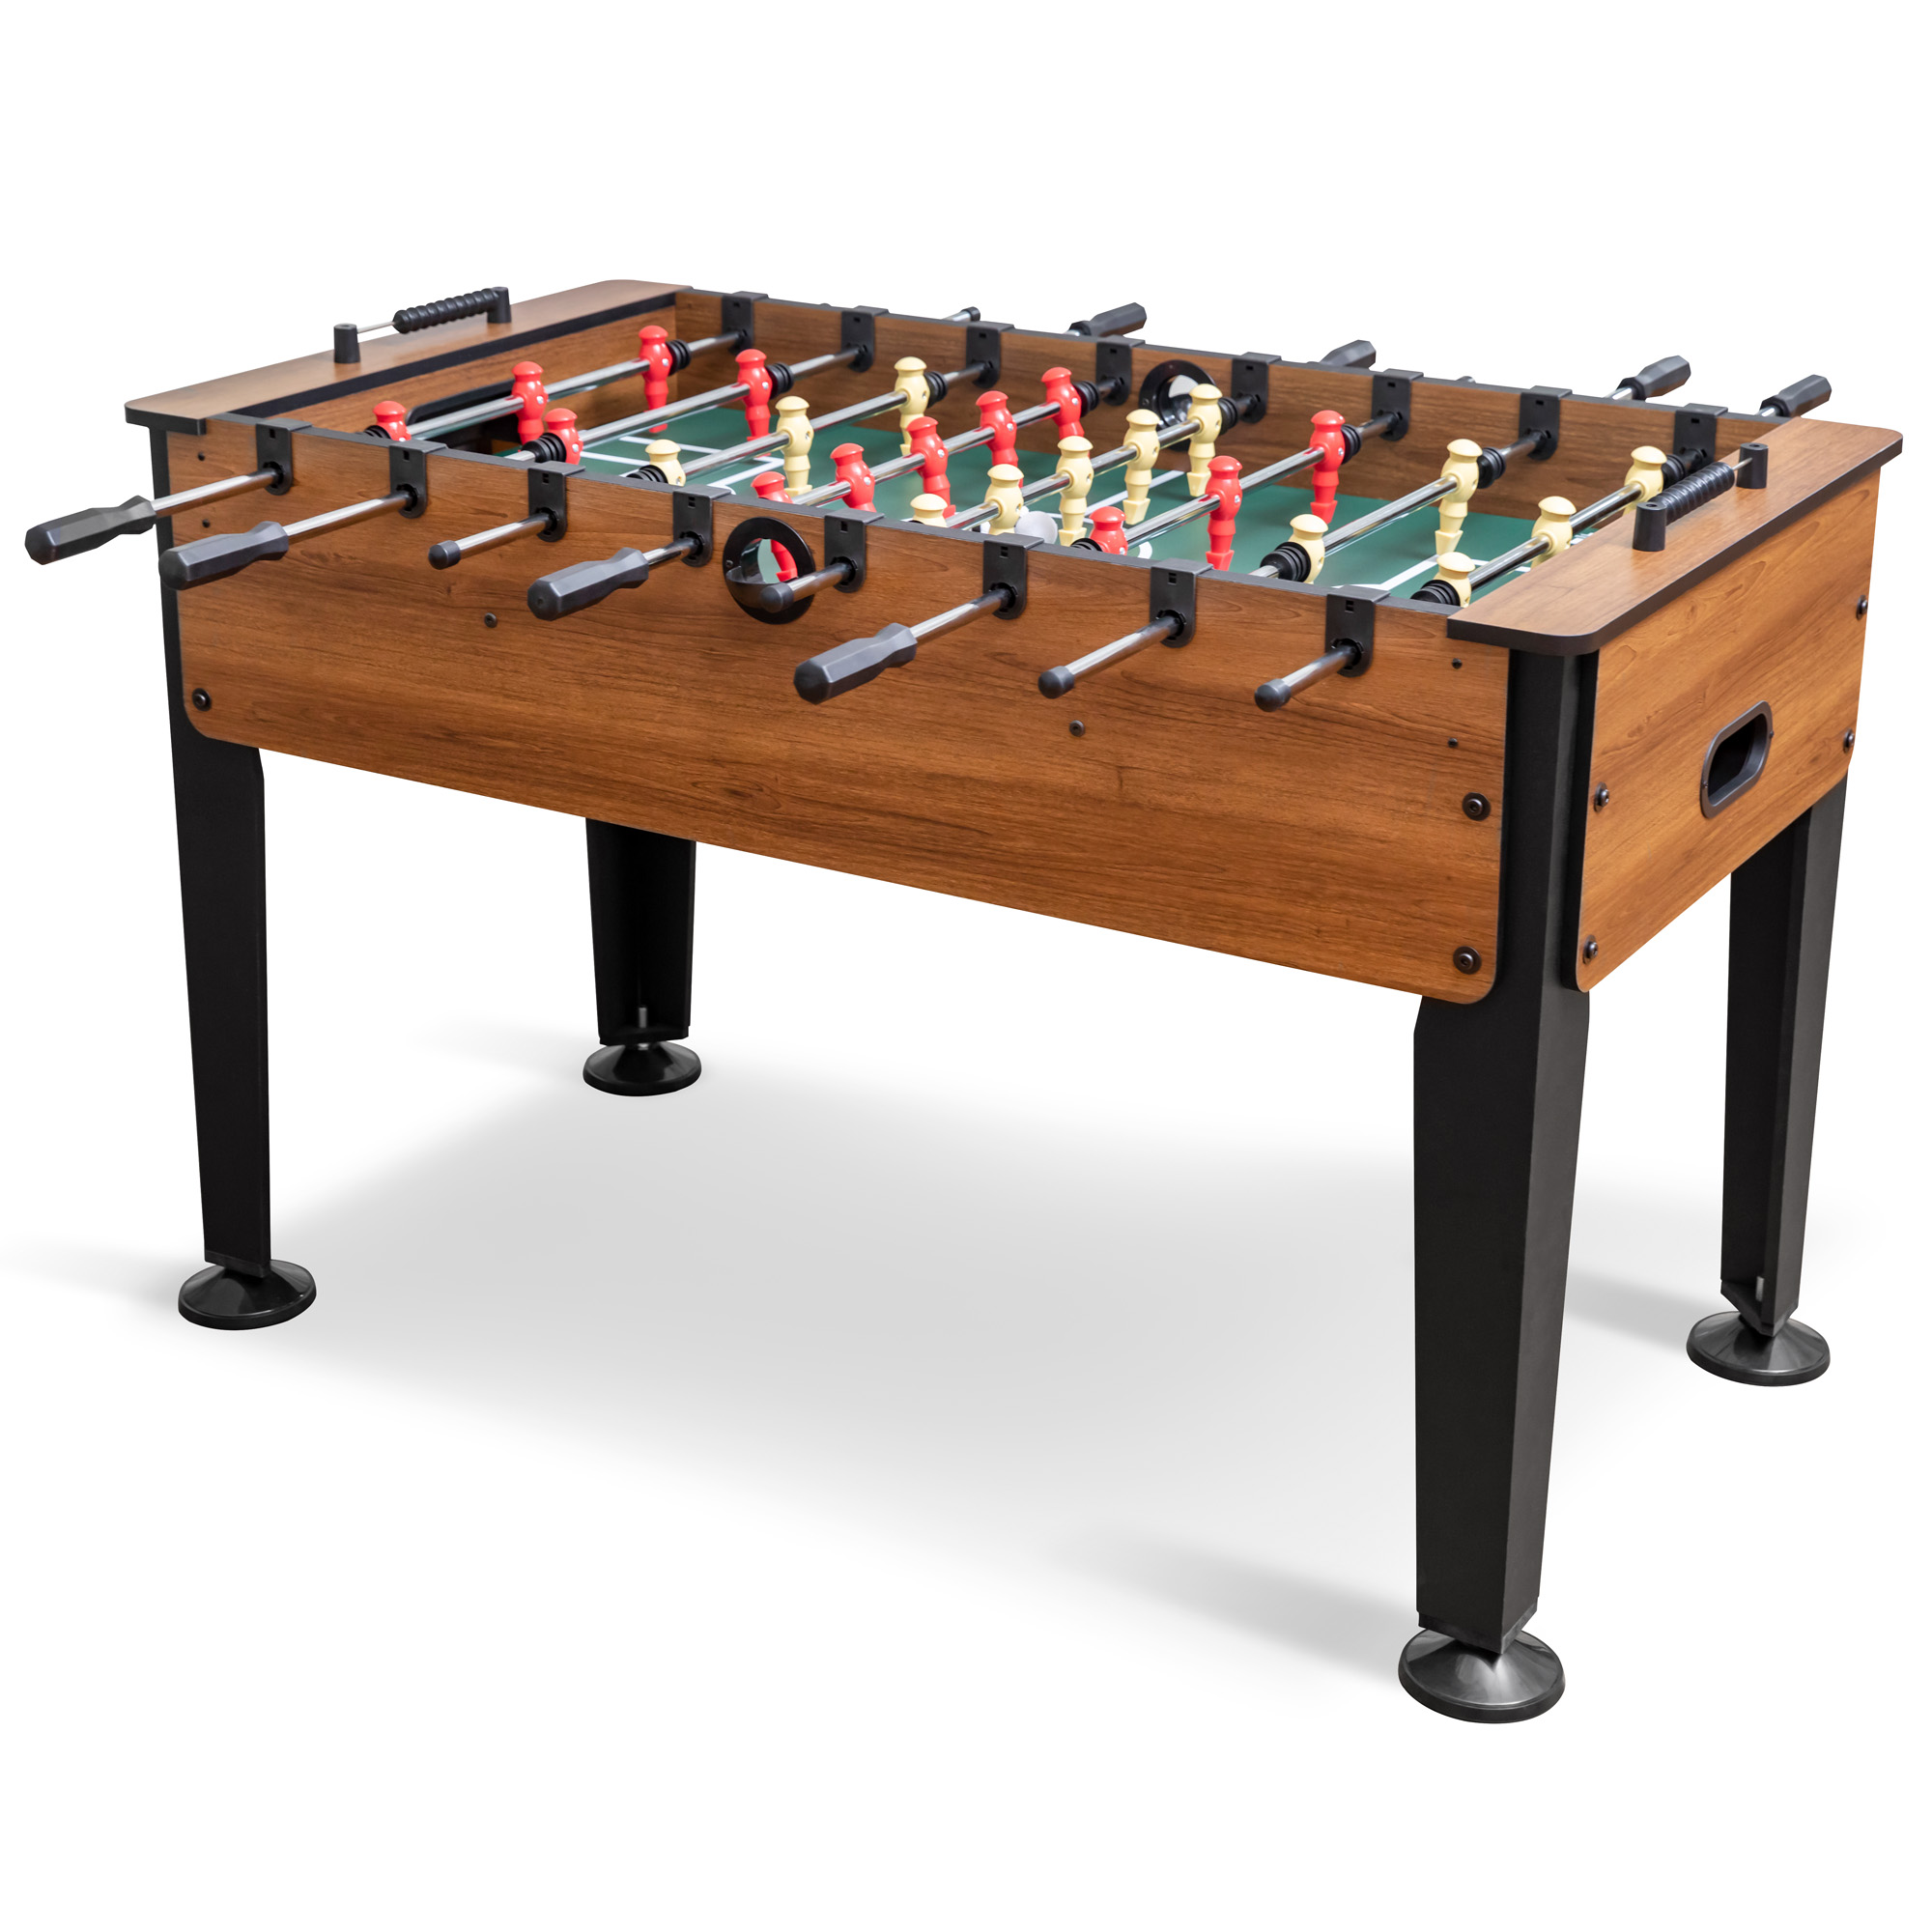 Classic Sport Newcastle Pro 54" Official Size Indoor Foosball Table - image 1 of 8